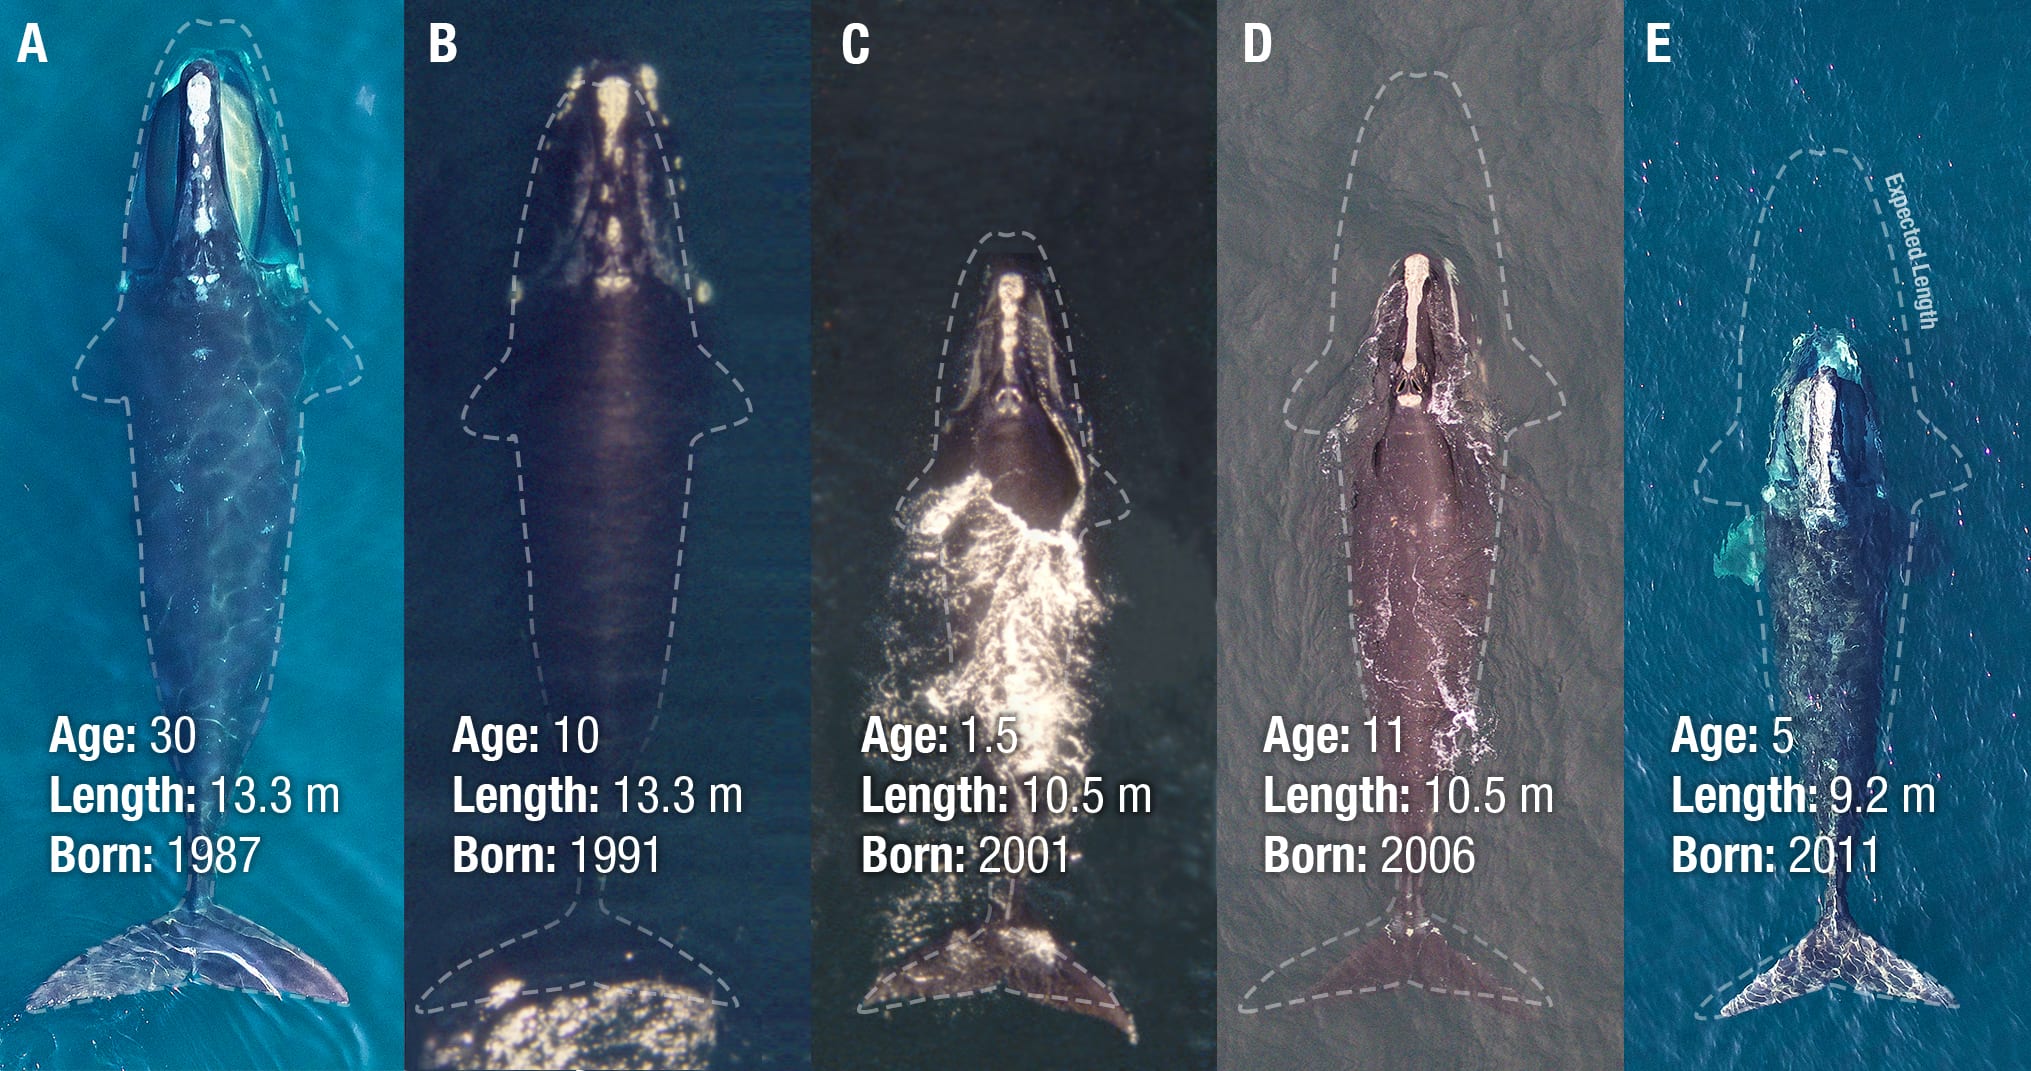 A scaled photo illustration comparing the body lengths of (A) Whale 1703, imaged in 2017 at age 30 using a remotely operated drone, (B) Whale 2145, imaged in
2001 at age 10 from a crewed aircraft, (C) Whale 3180, imaged in 2002 at age 1.5 from a crewed aircraft, (D) Whale 3617, imaged in 2017 at age 11 using a drone,
and (E) Whale 4130, imaged in 2016 at age 5 using a drone. The dashed outline in each panel represents the median model-estimated body length for a whale of
the same age born in 1981 with no history of entanglements or maternal entanglements. Note the entanglement scarring around the caudal peduncle in (D).
Figure design by Madeline Wukusick.
